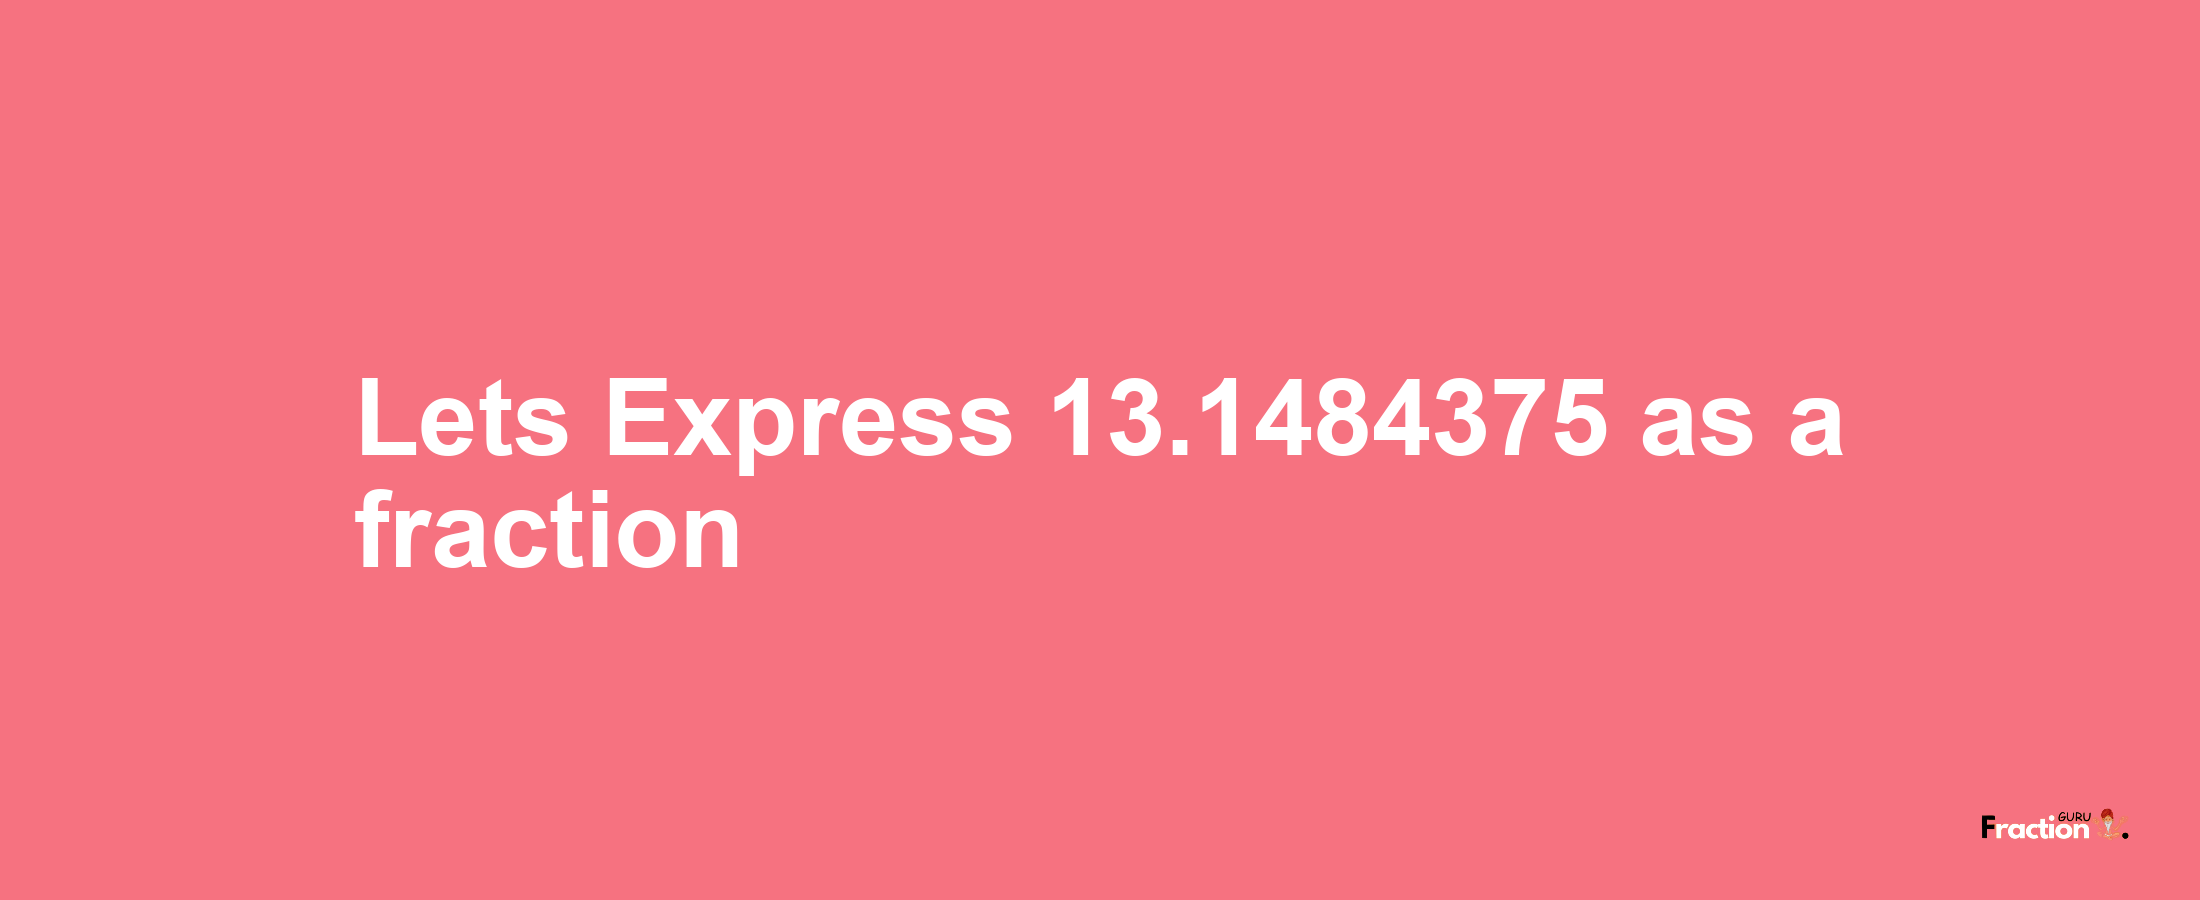 Lets Express 13.1484375 as afraction